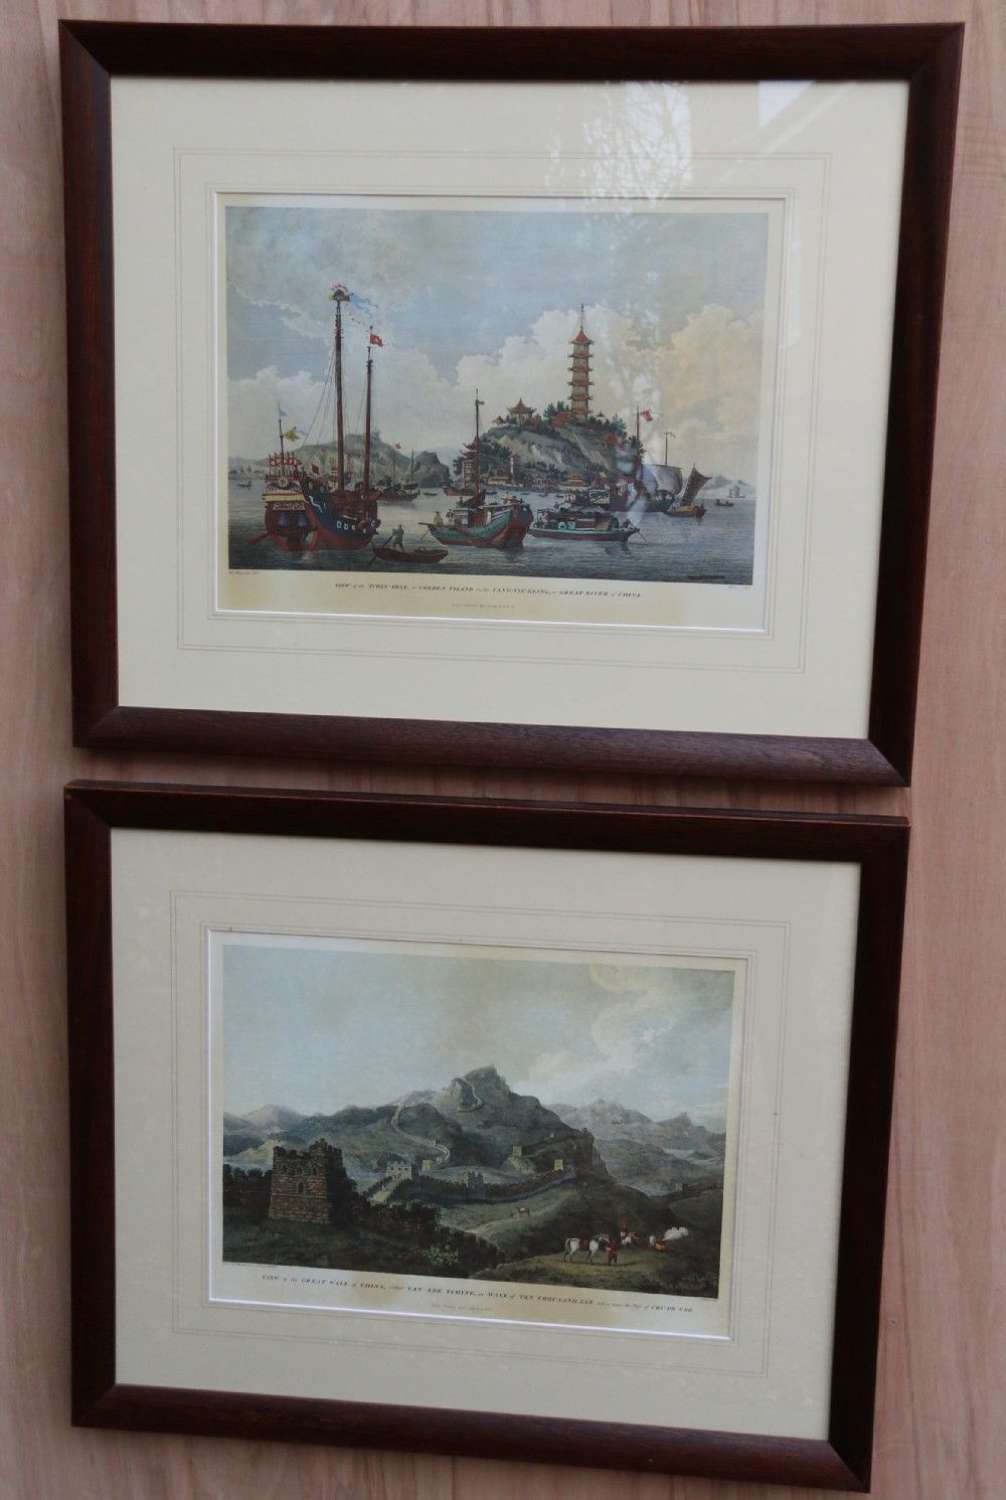 A Decorative Pair Of Coloured Prints Showing Early Views Of China